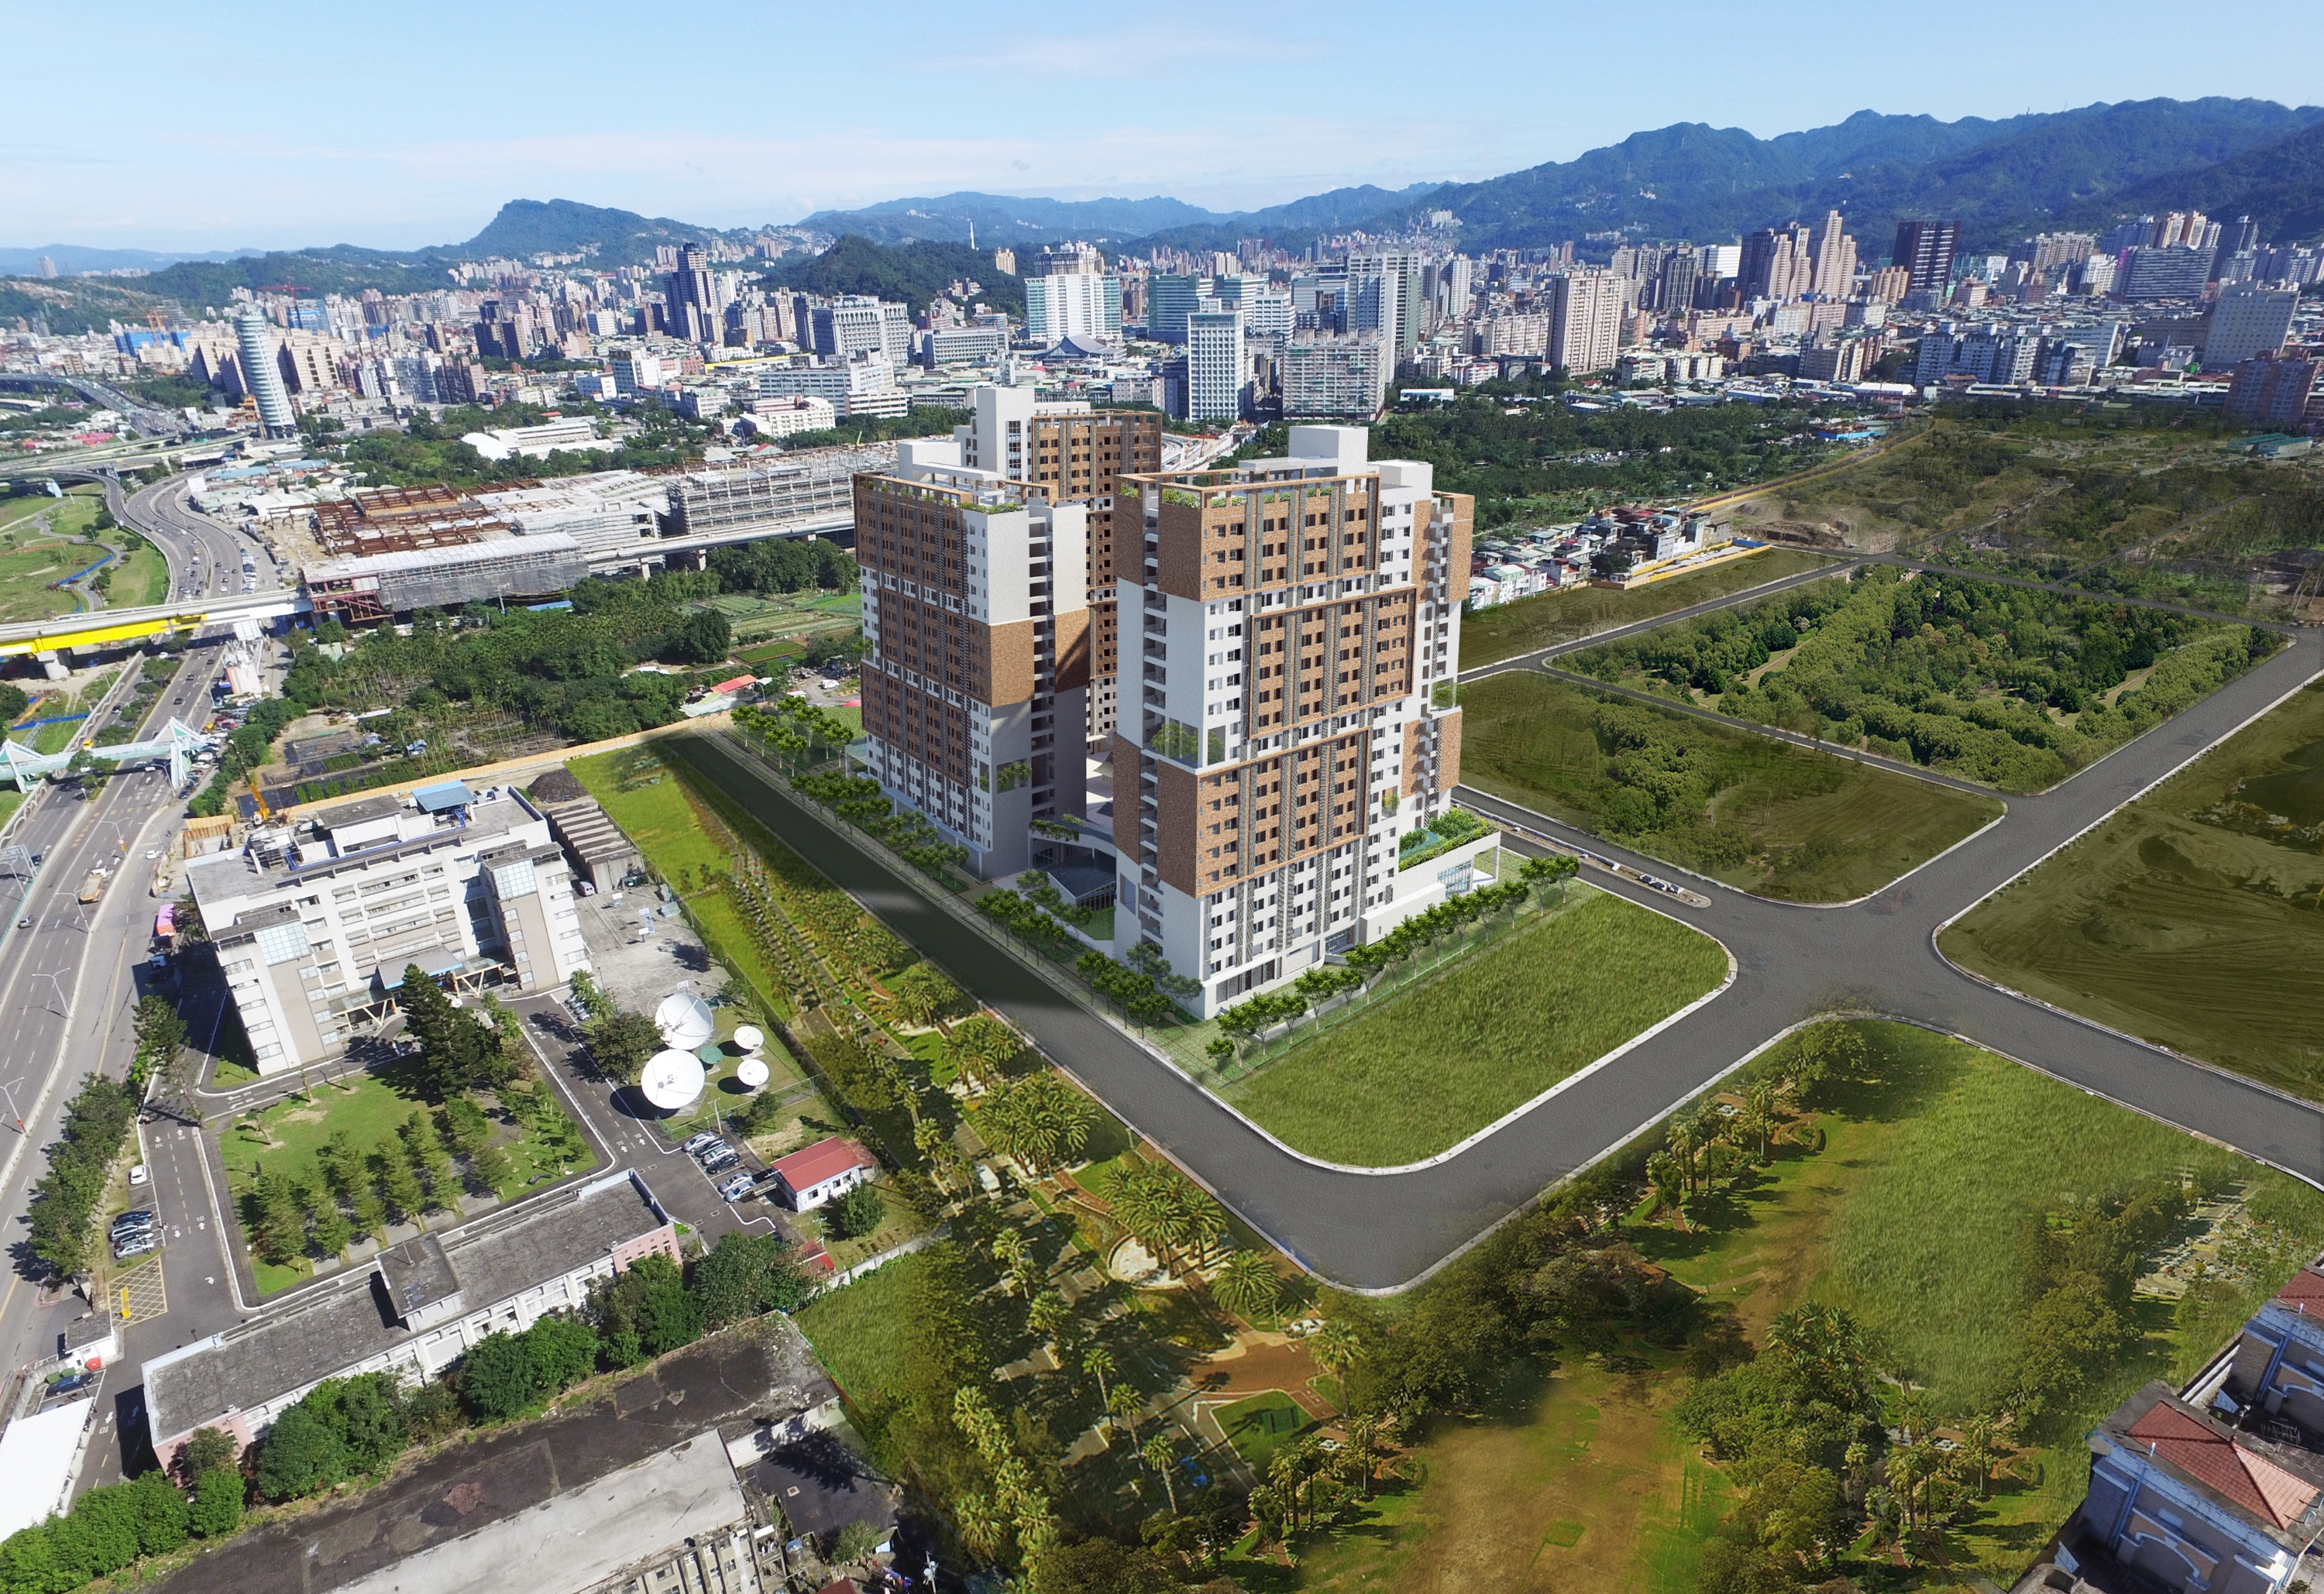 New Taipei City Social Housing Project